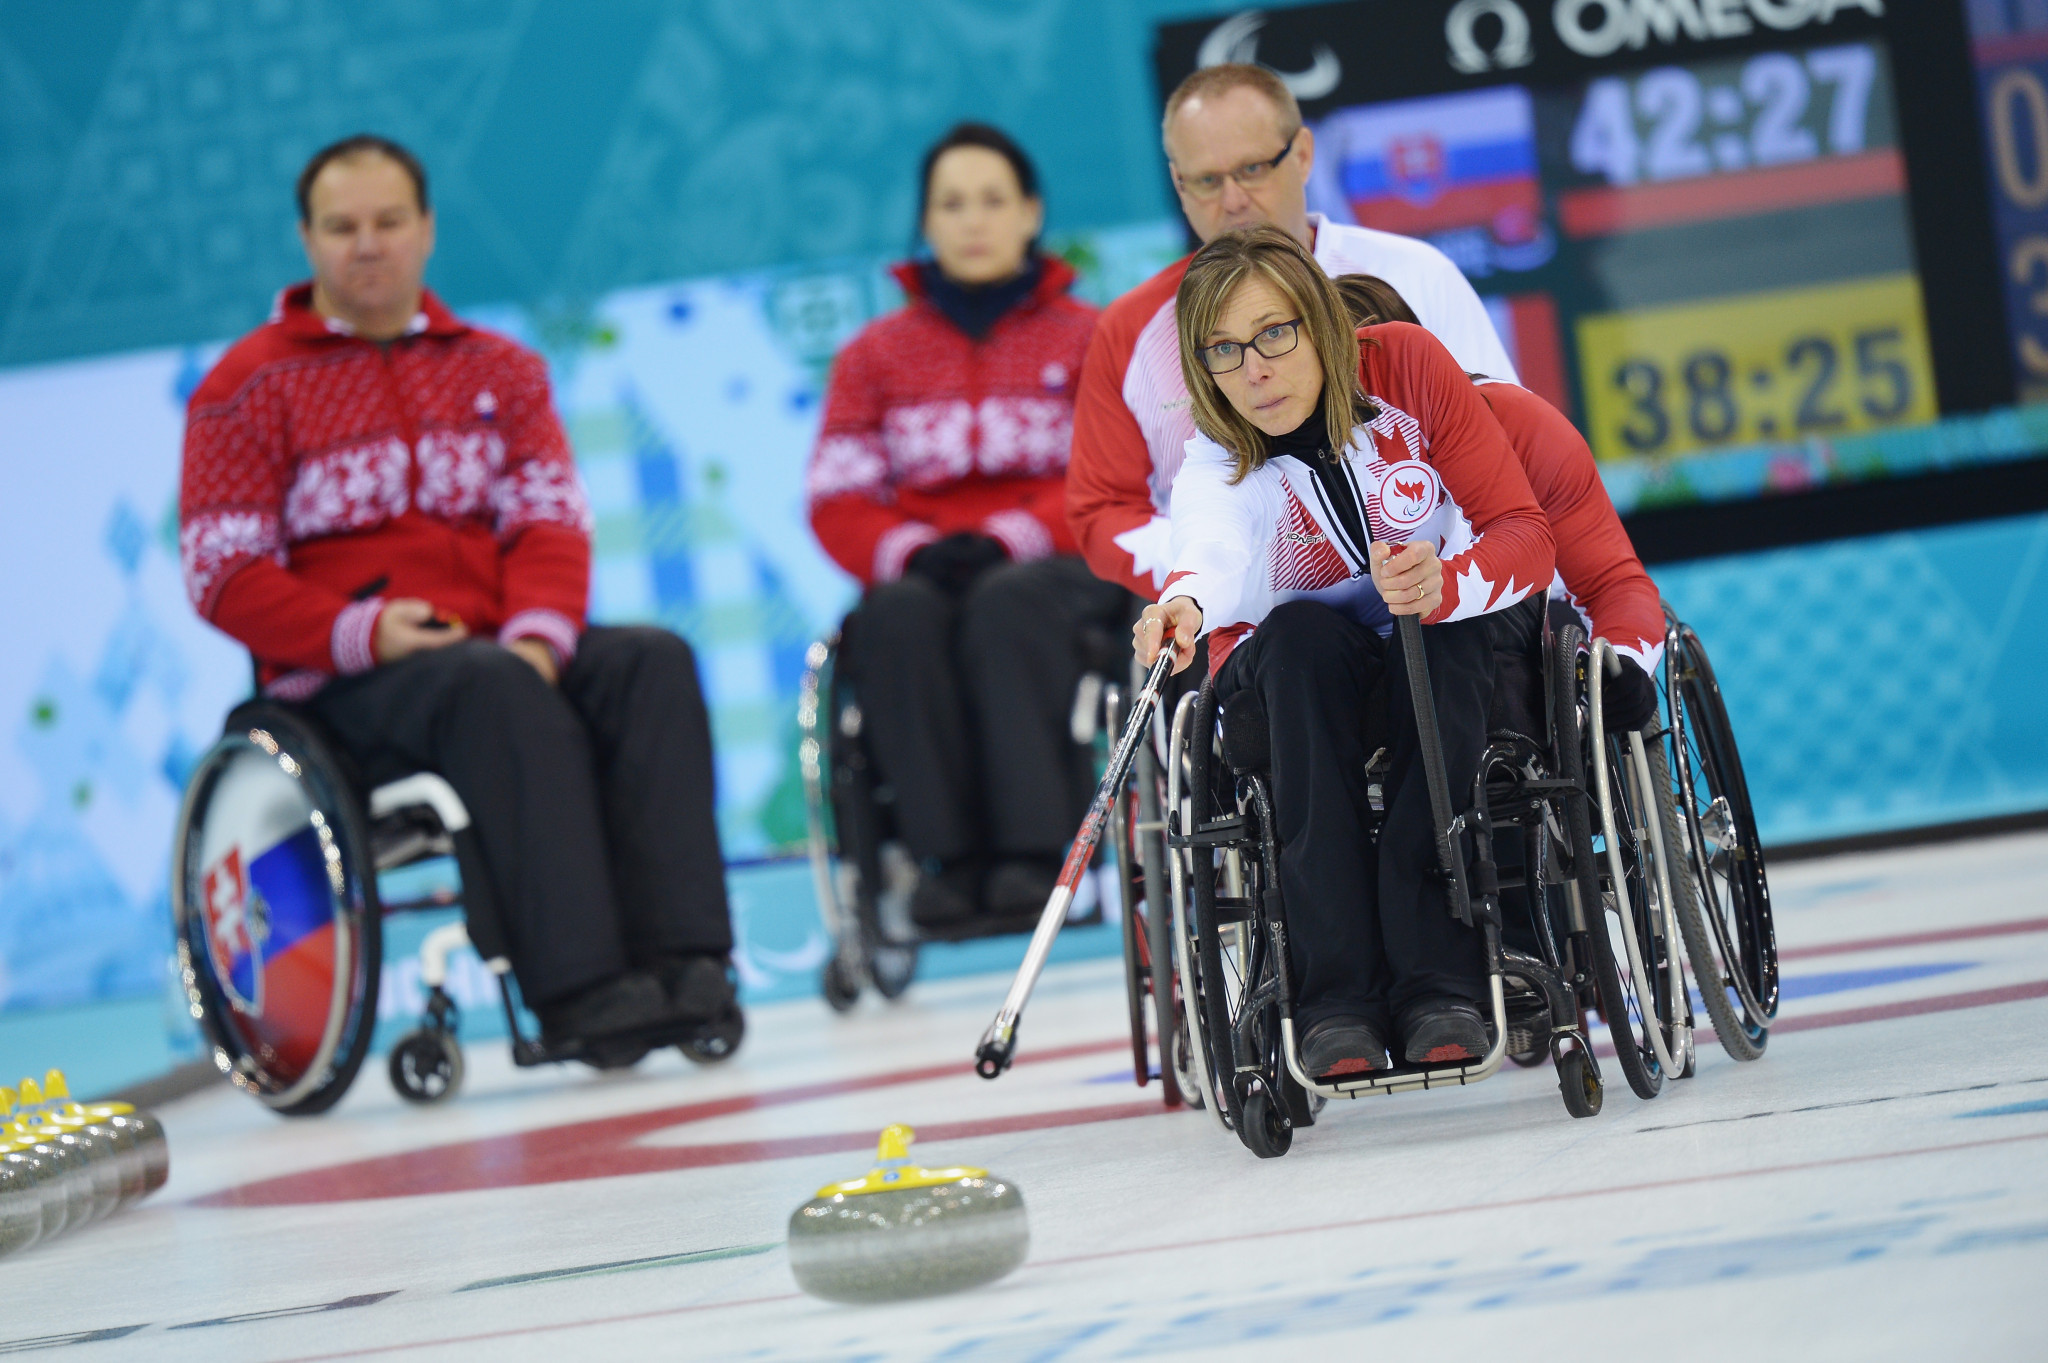 Wheelchair curler Gaudet "humbled" by Canadian Hall of Fame honour